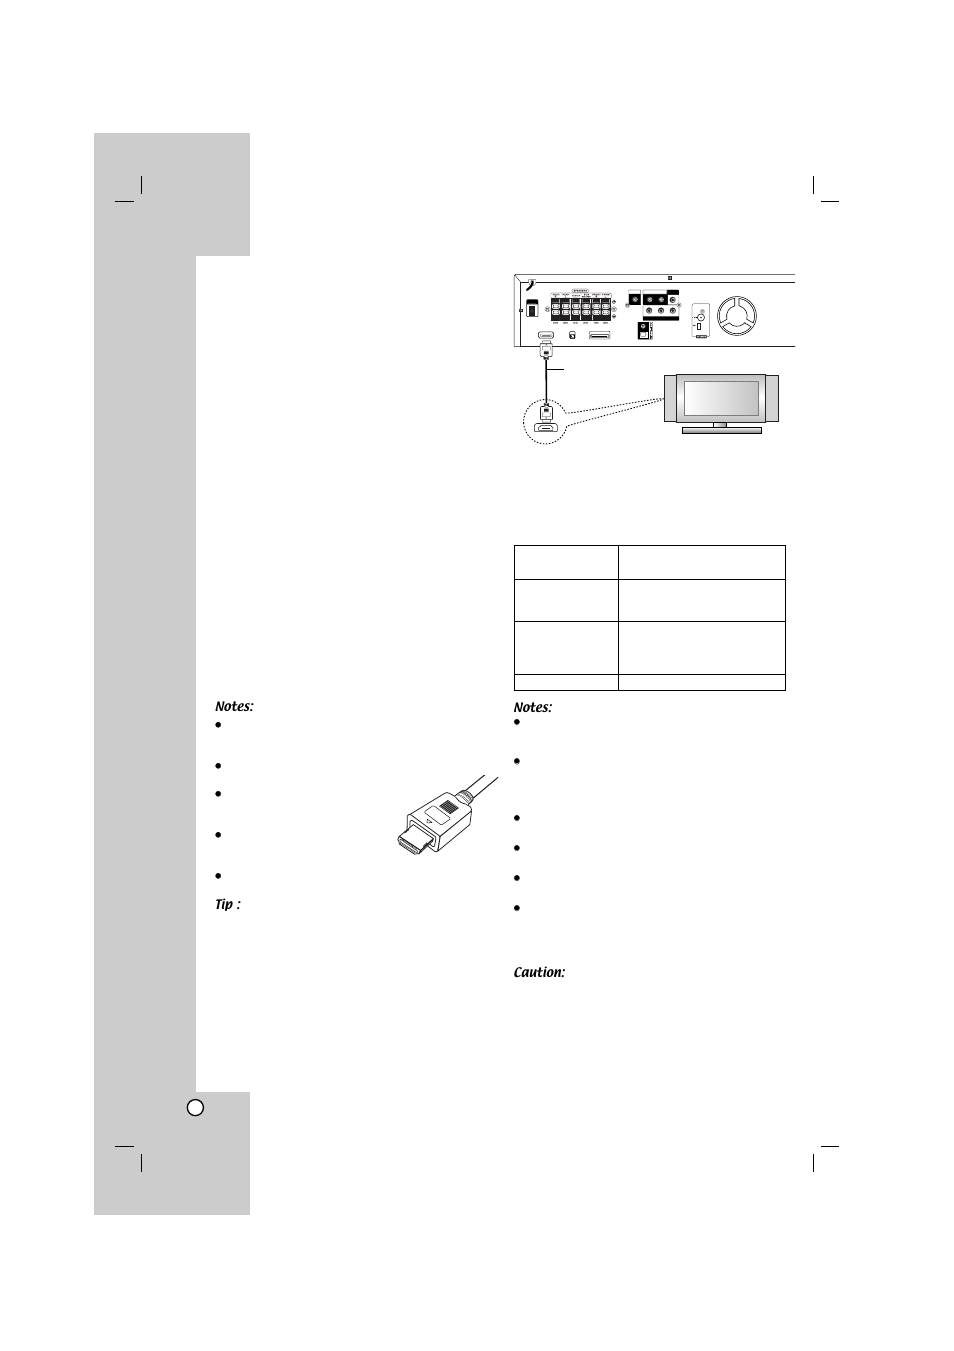 Hdmi connection, Monit monitor or out out | LG LHT764 User Manual | Page 14 / 41